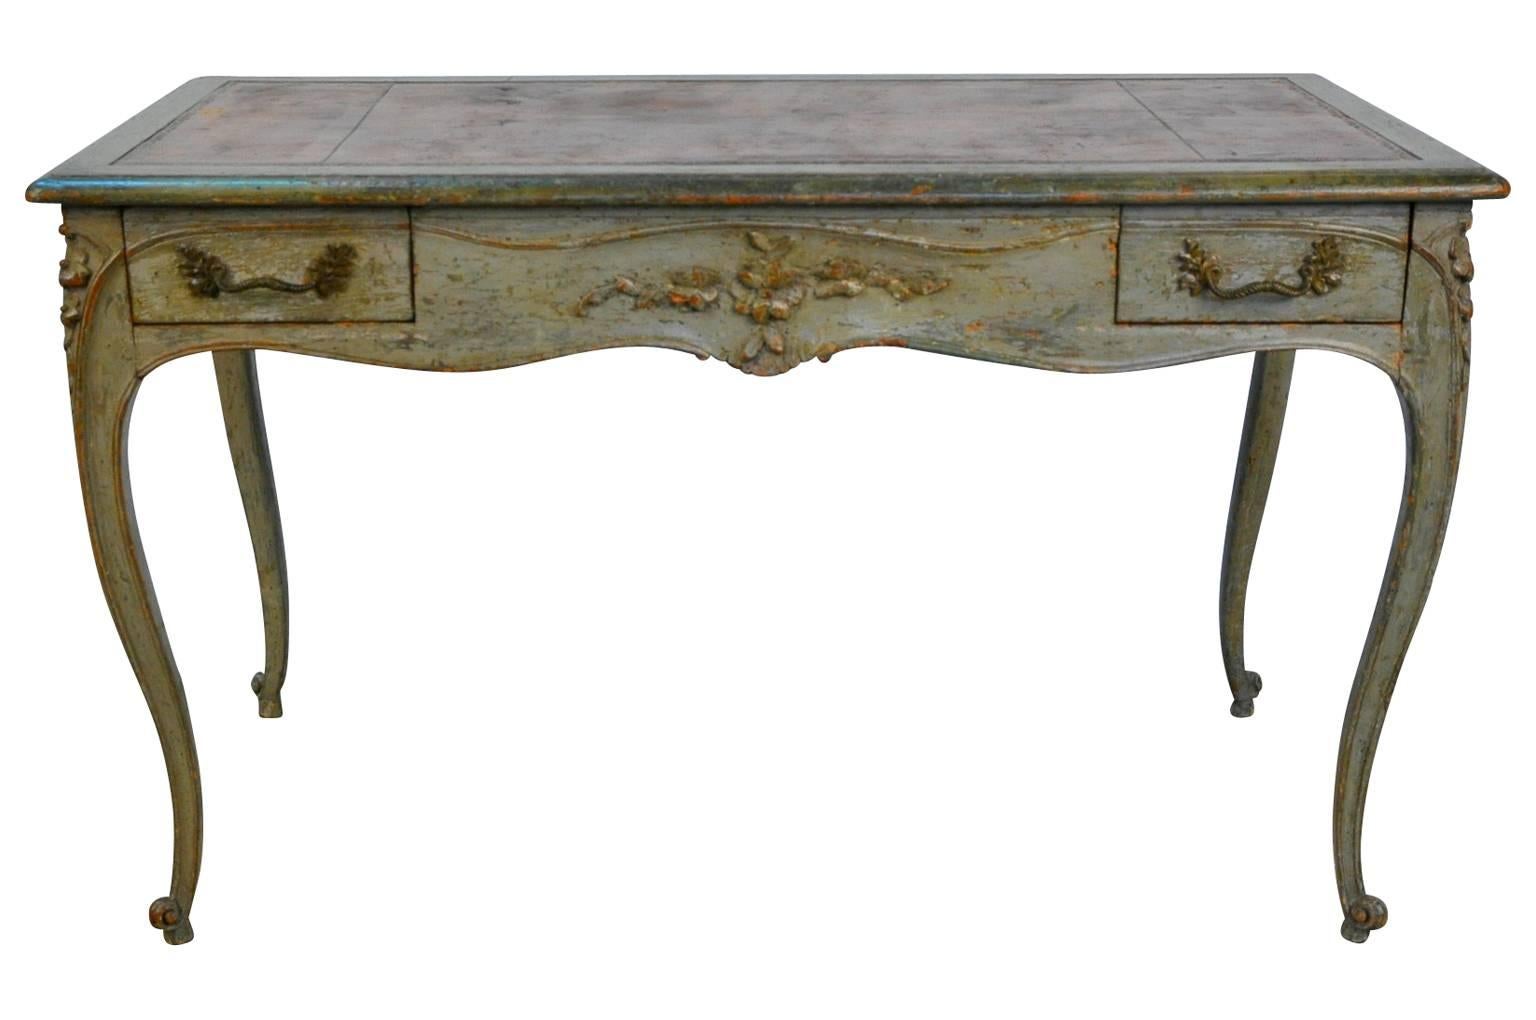 A sensational French Louis XV period desk in painted wood and leather top. Tremendous painted finish and patina. Soundly constructed with two drawers and delightful carved floral motifs to all sides. A fabulous pieces for any living area or bedroom.